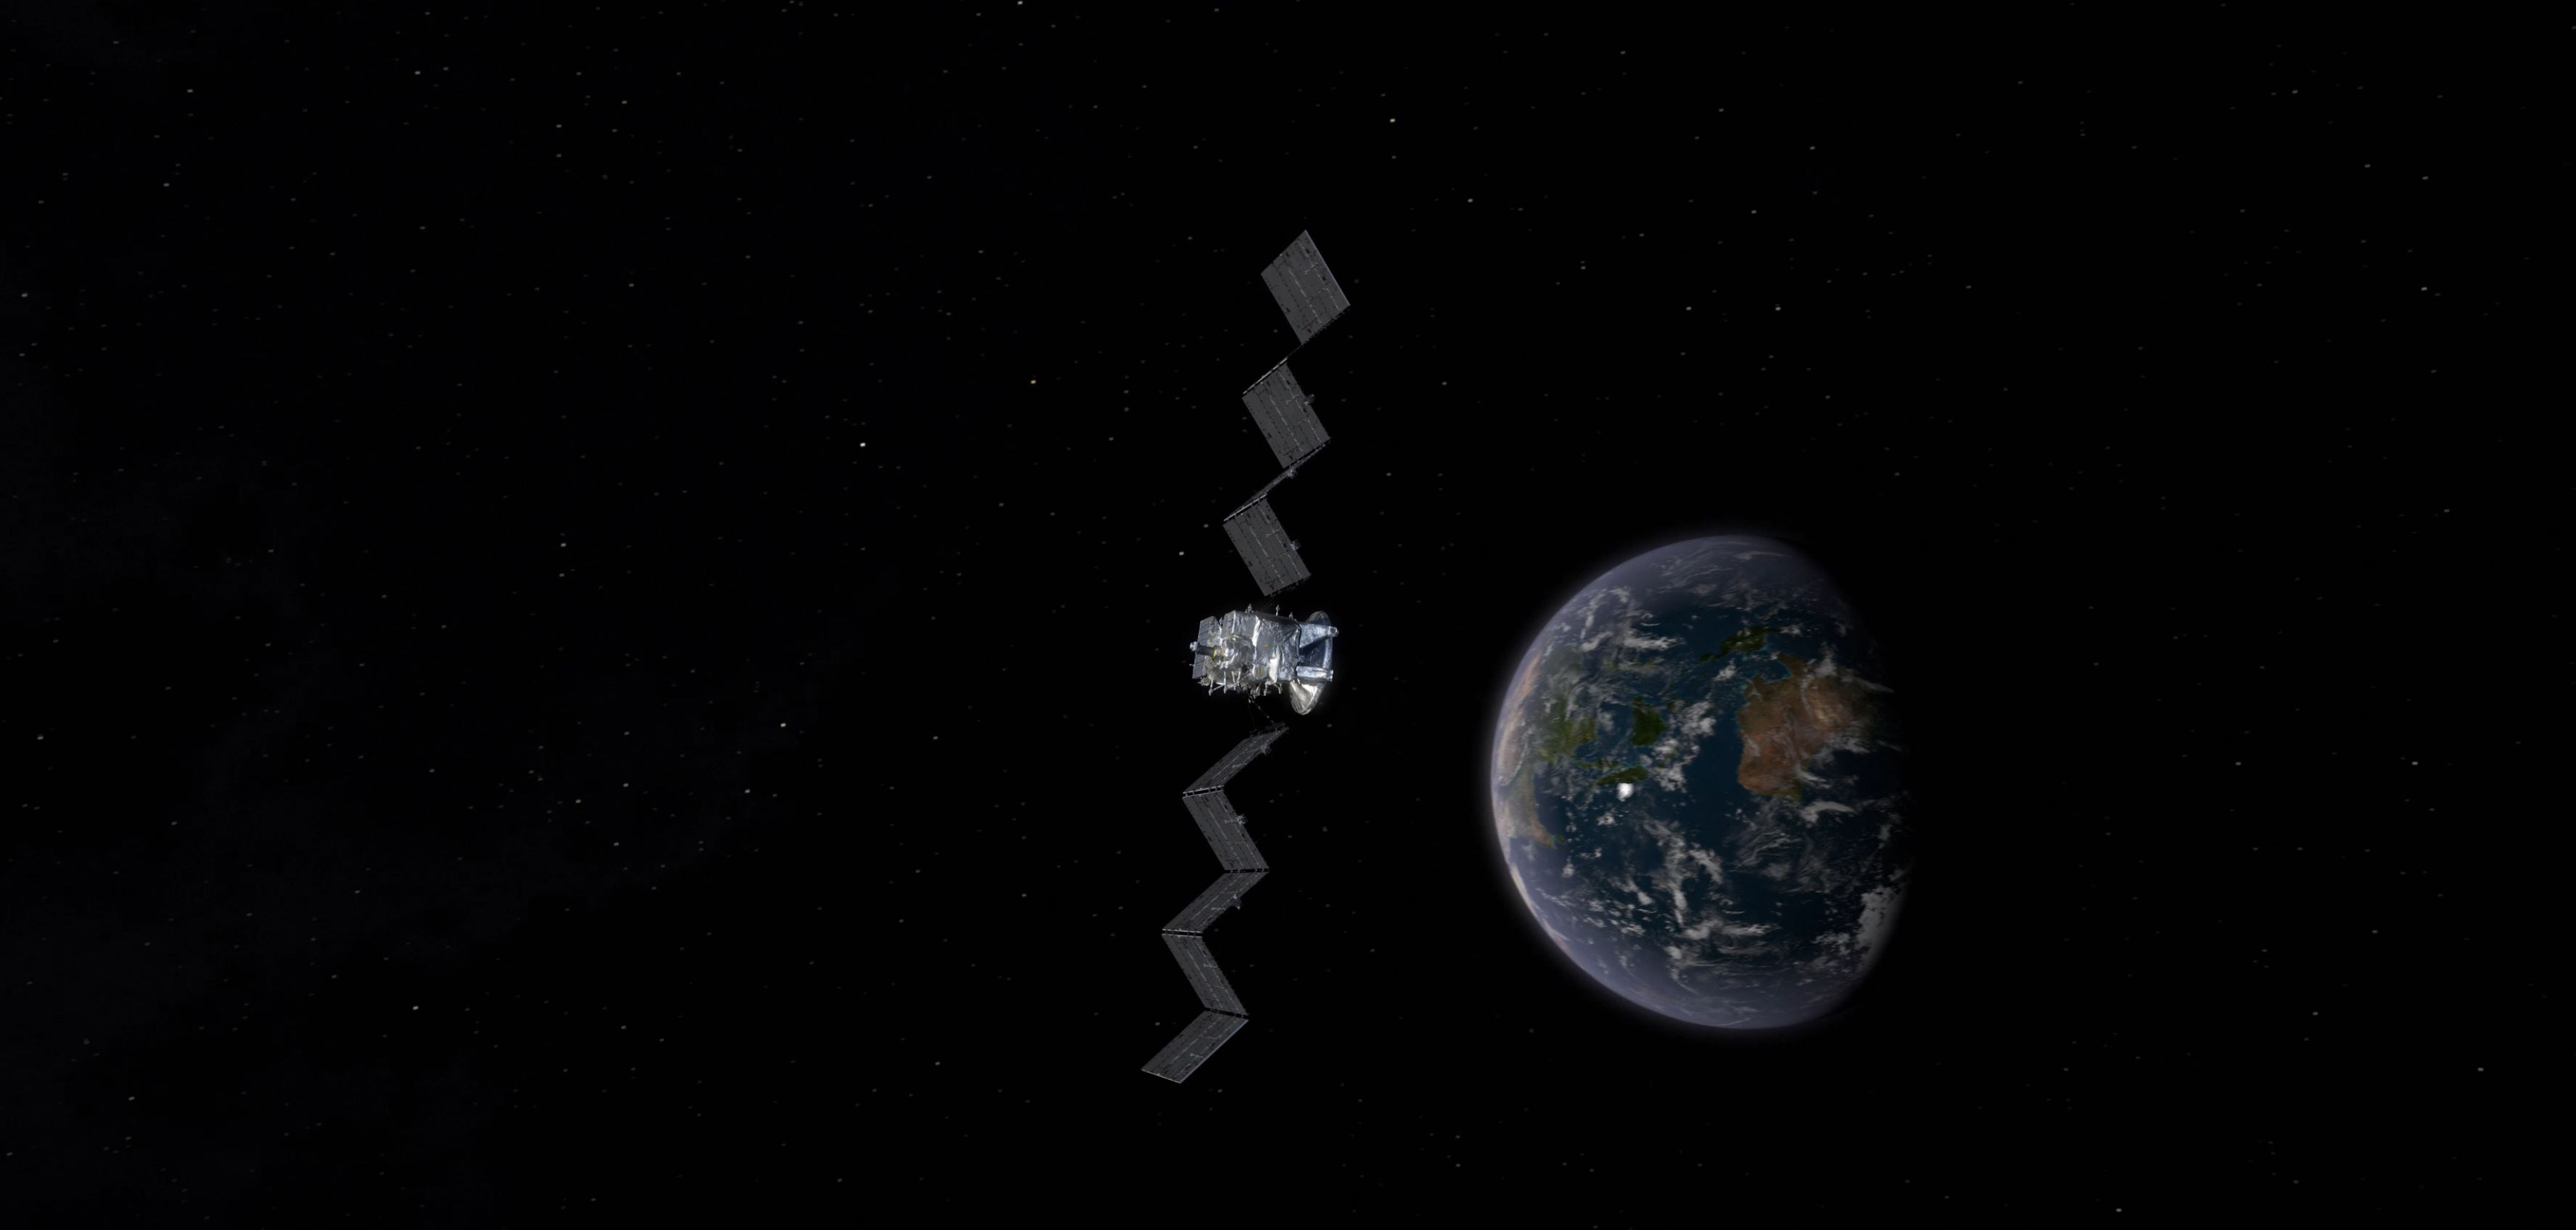 A screengrab from a video showing Europa Clipper opening its solar arrays in space. Earth is behind the spacecraft.